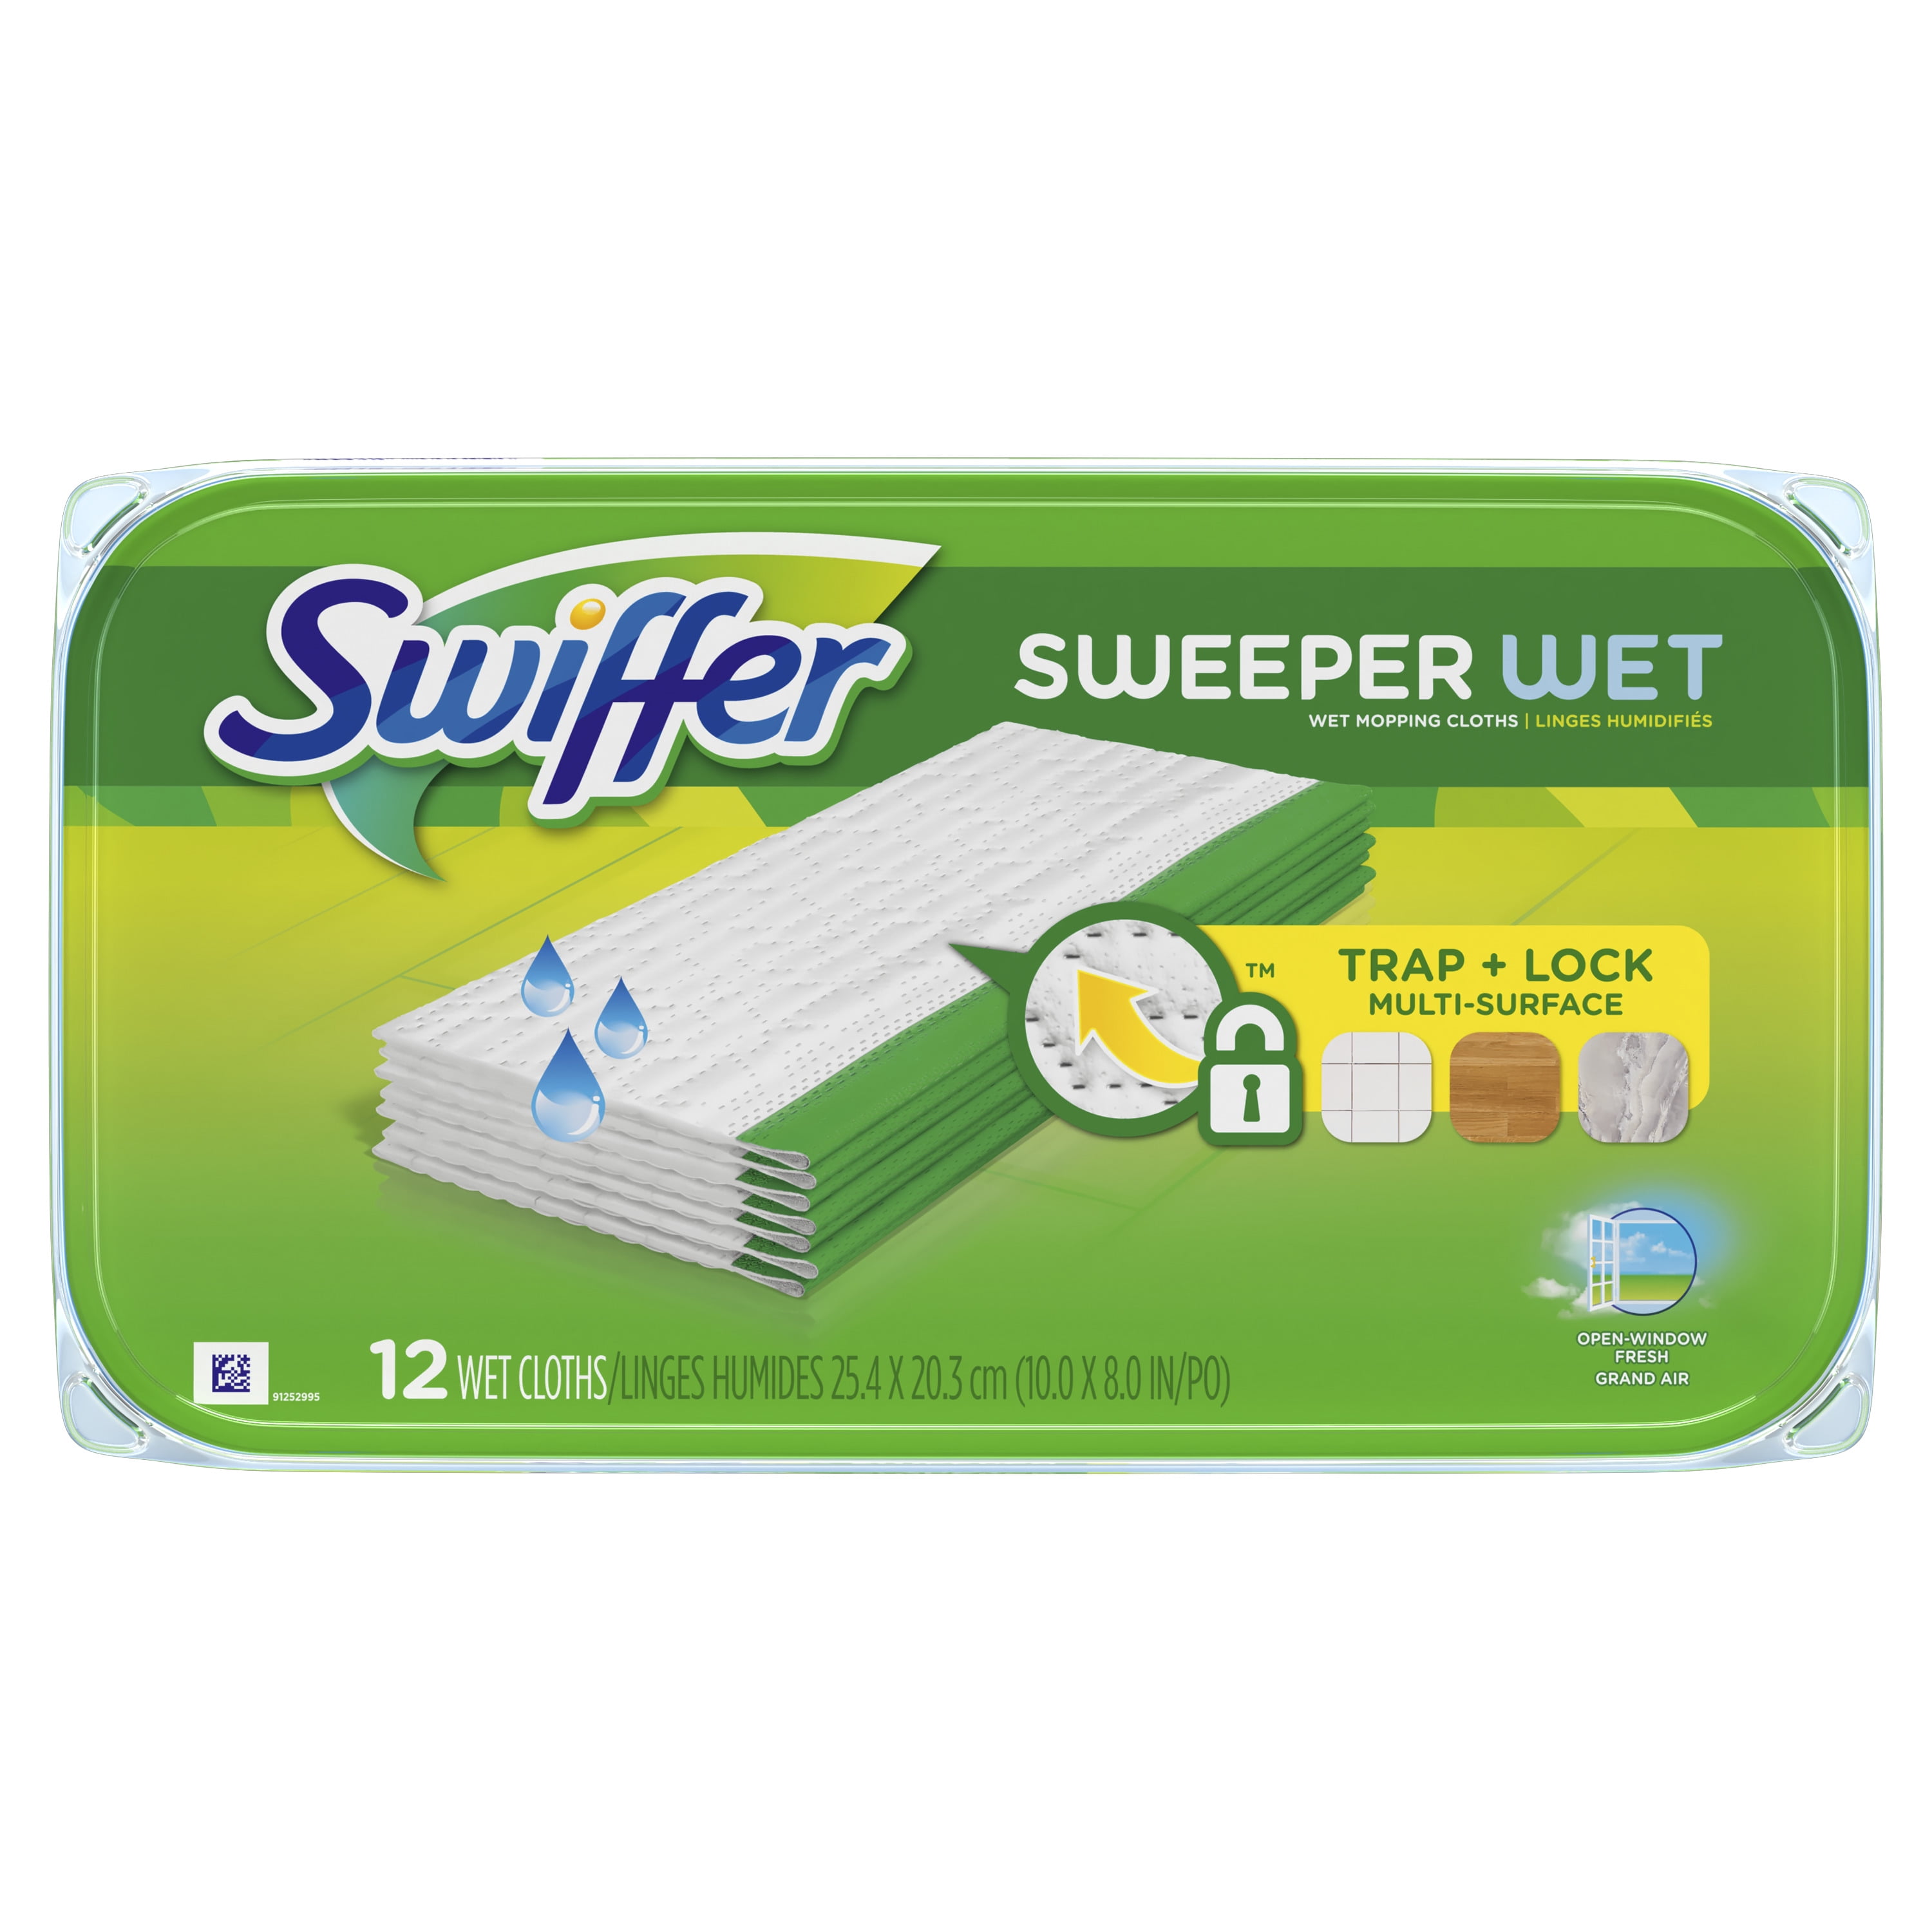 SWIFFER SWEEPER WET MOPPING CLOTHS  12 REFILLS 1 LOT 